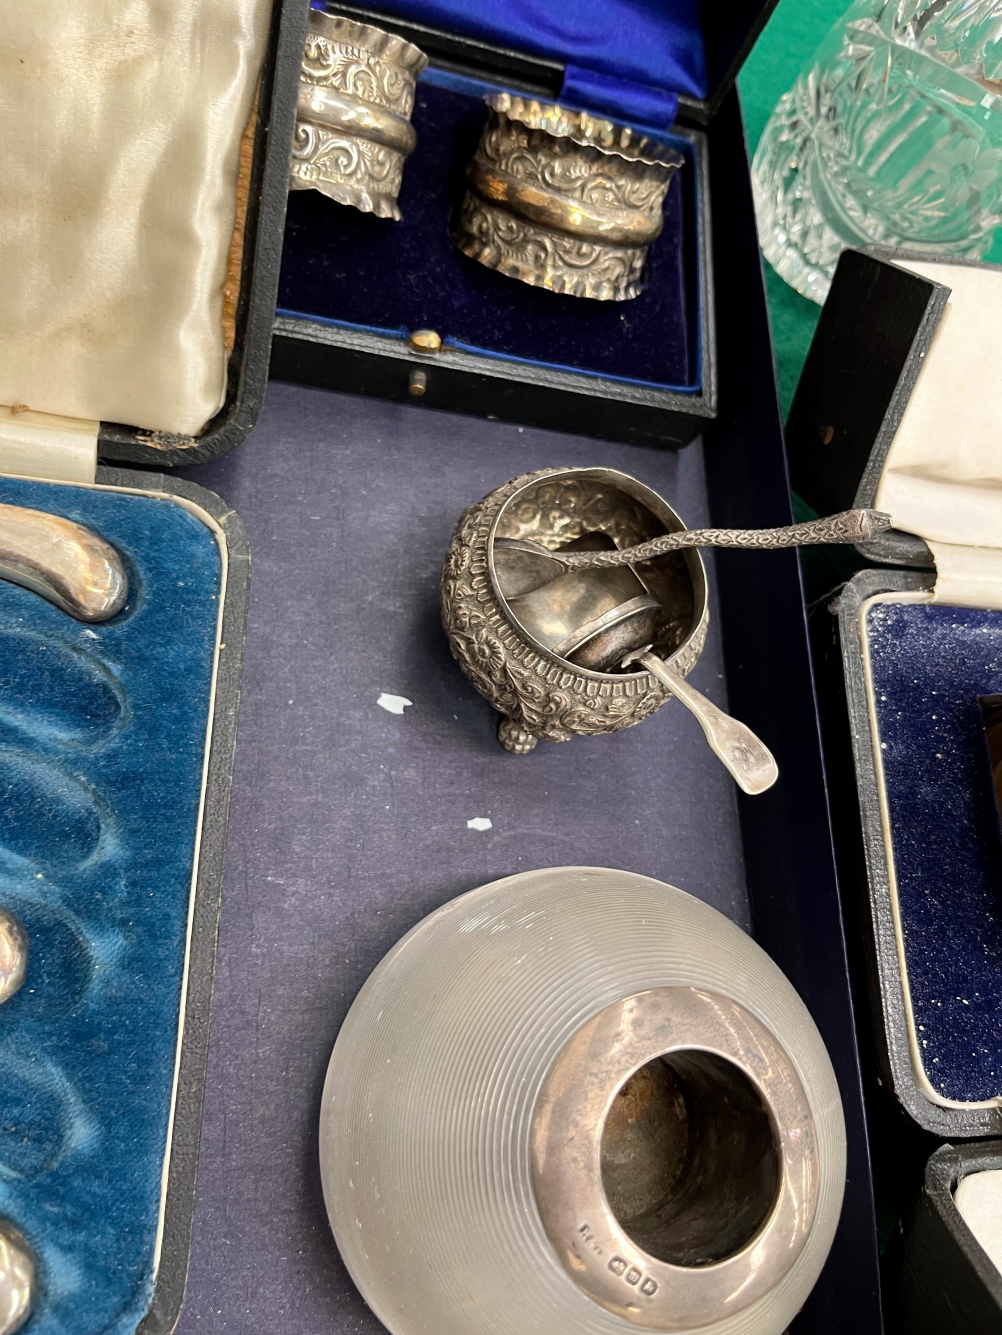 BOXED SILVER WARES INCLUDING NAPKIN RINGS, A SUGAR CASTER, COFFEE SPOONS TOGETHER WITH A GLASS - Image 2 of 5